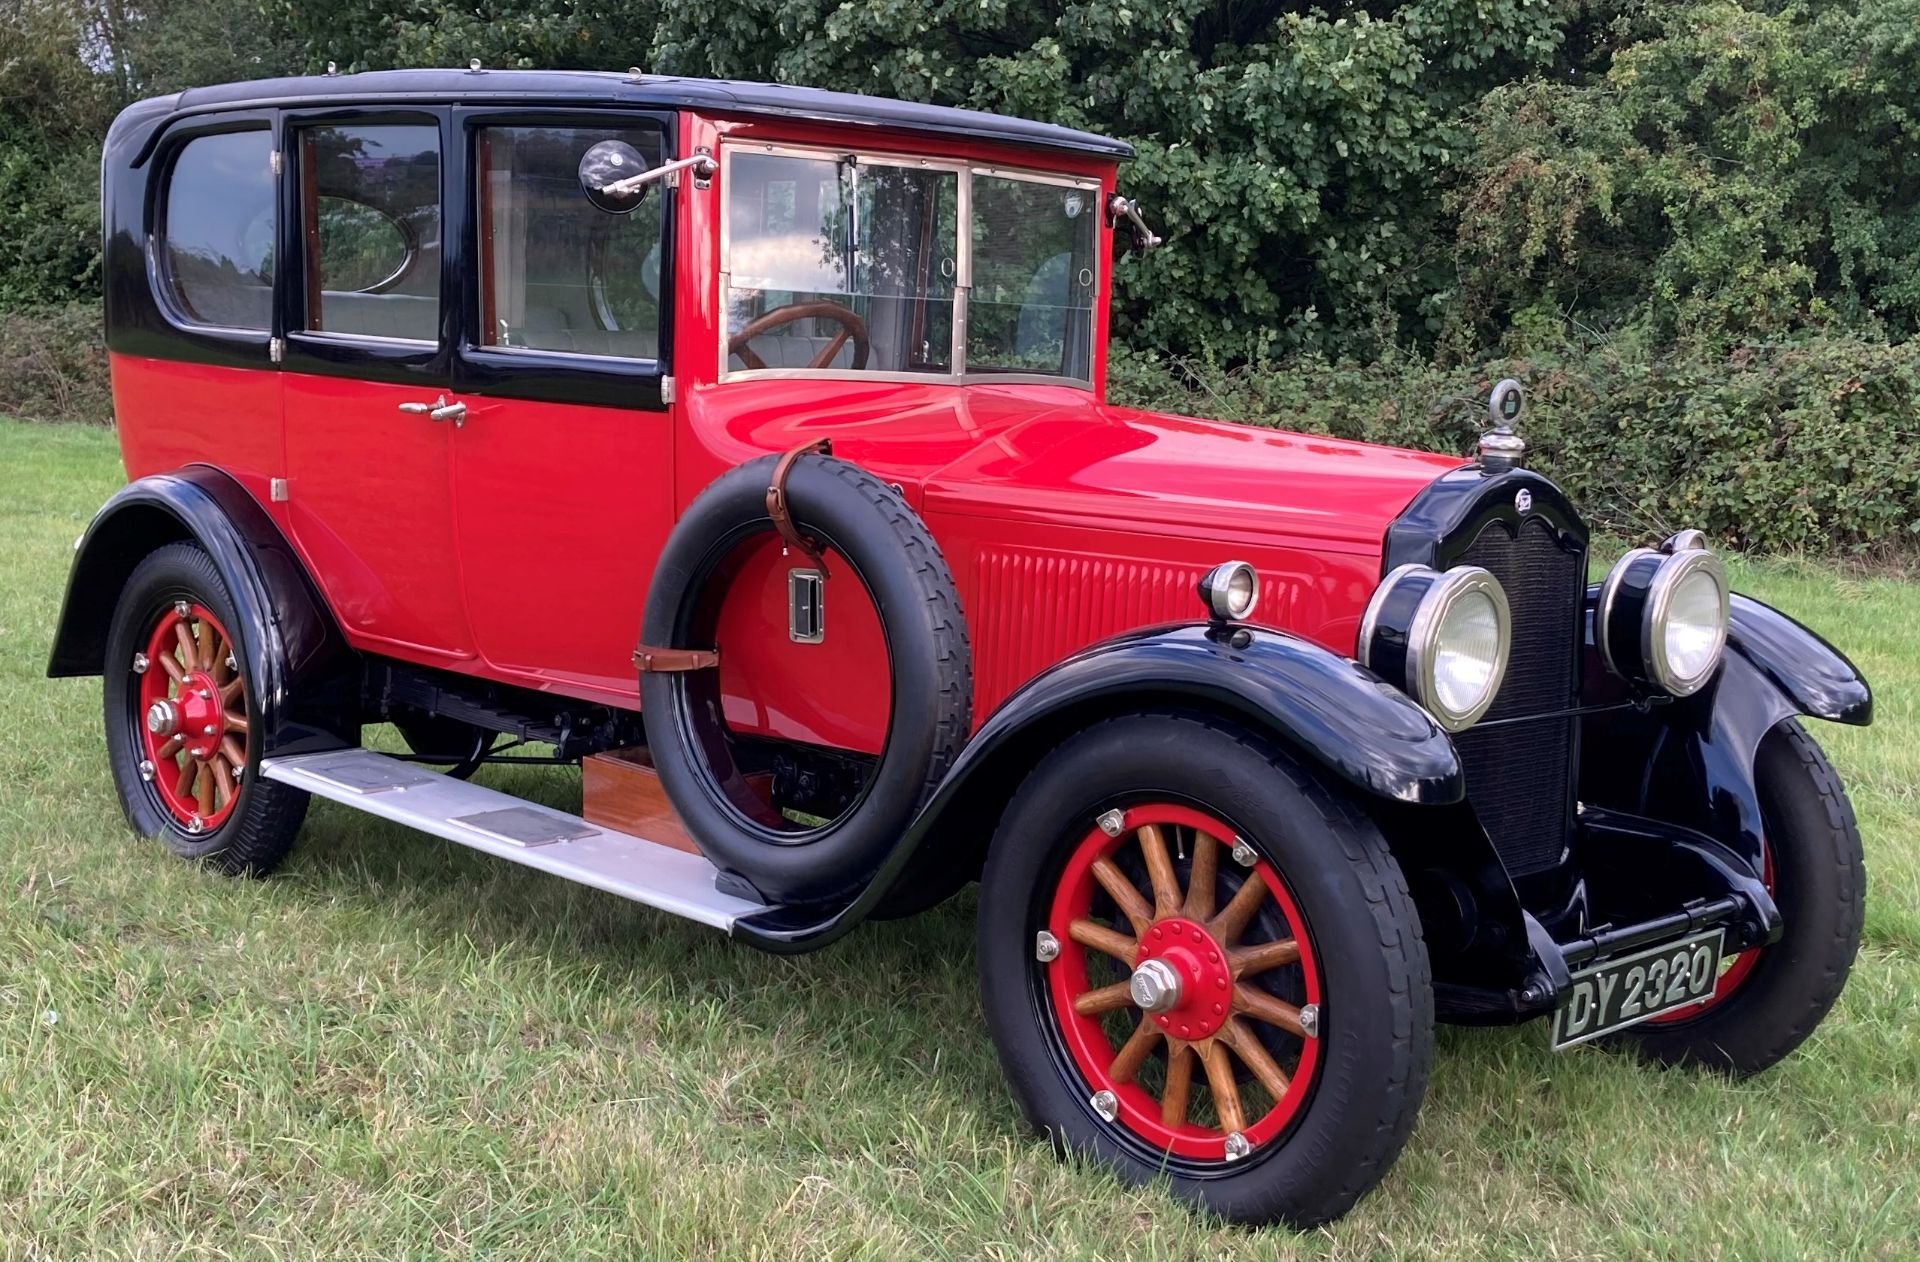 HISTORIC VEHICLE - 1924 BUICK McLAUGHLIN LIMOUSINE - Petrol - Red/Black - Blue/grey cloth interior. - Image 4 of 30